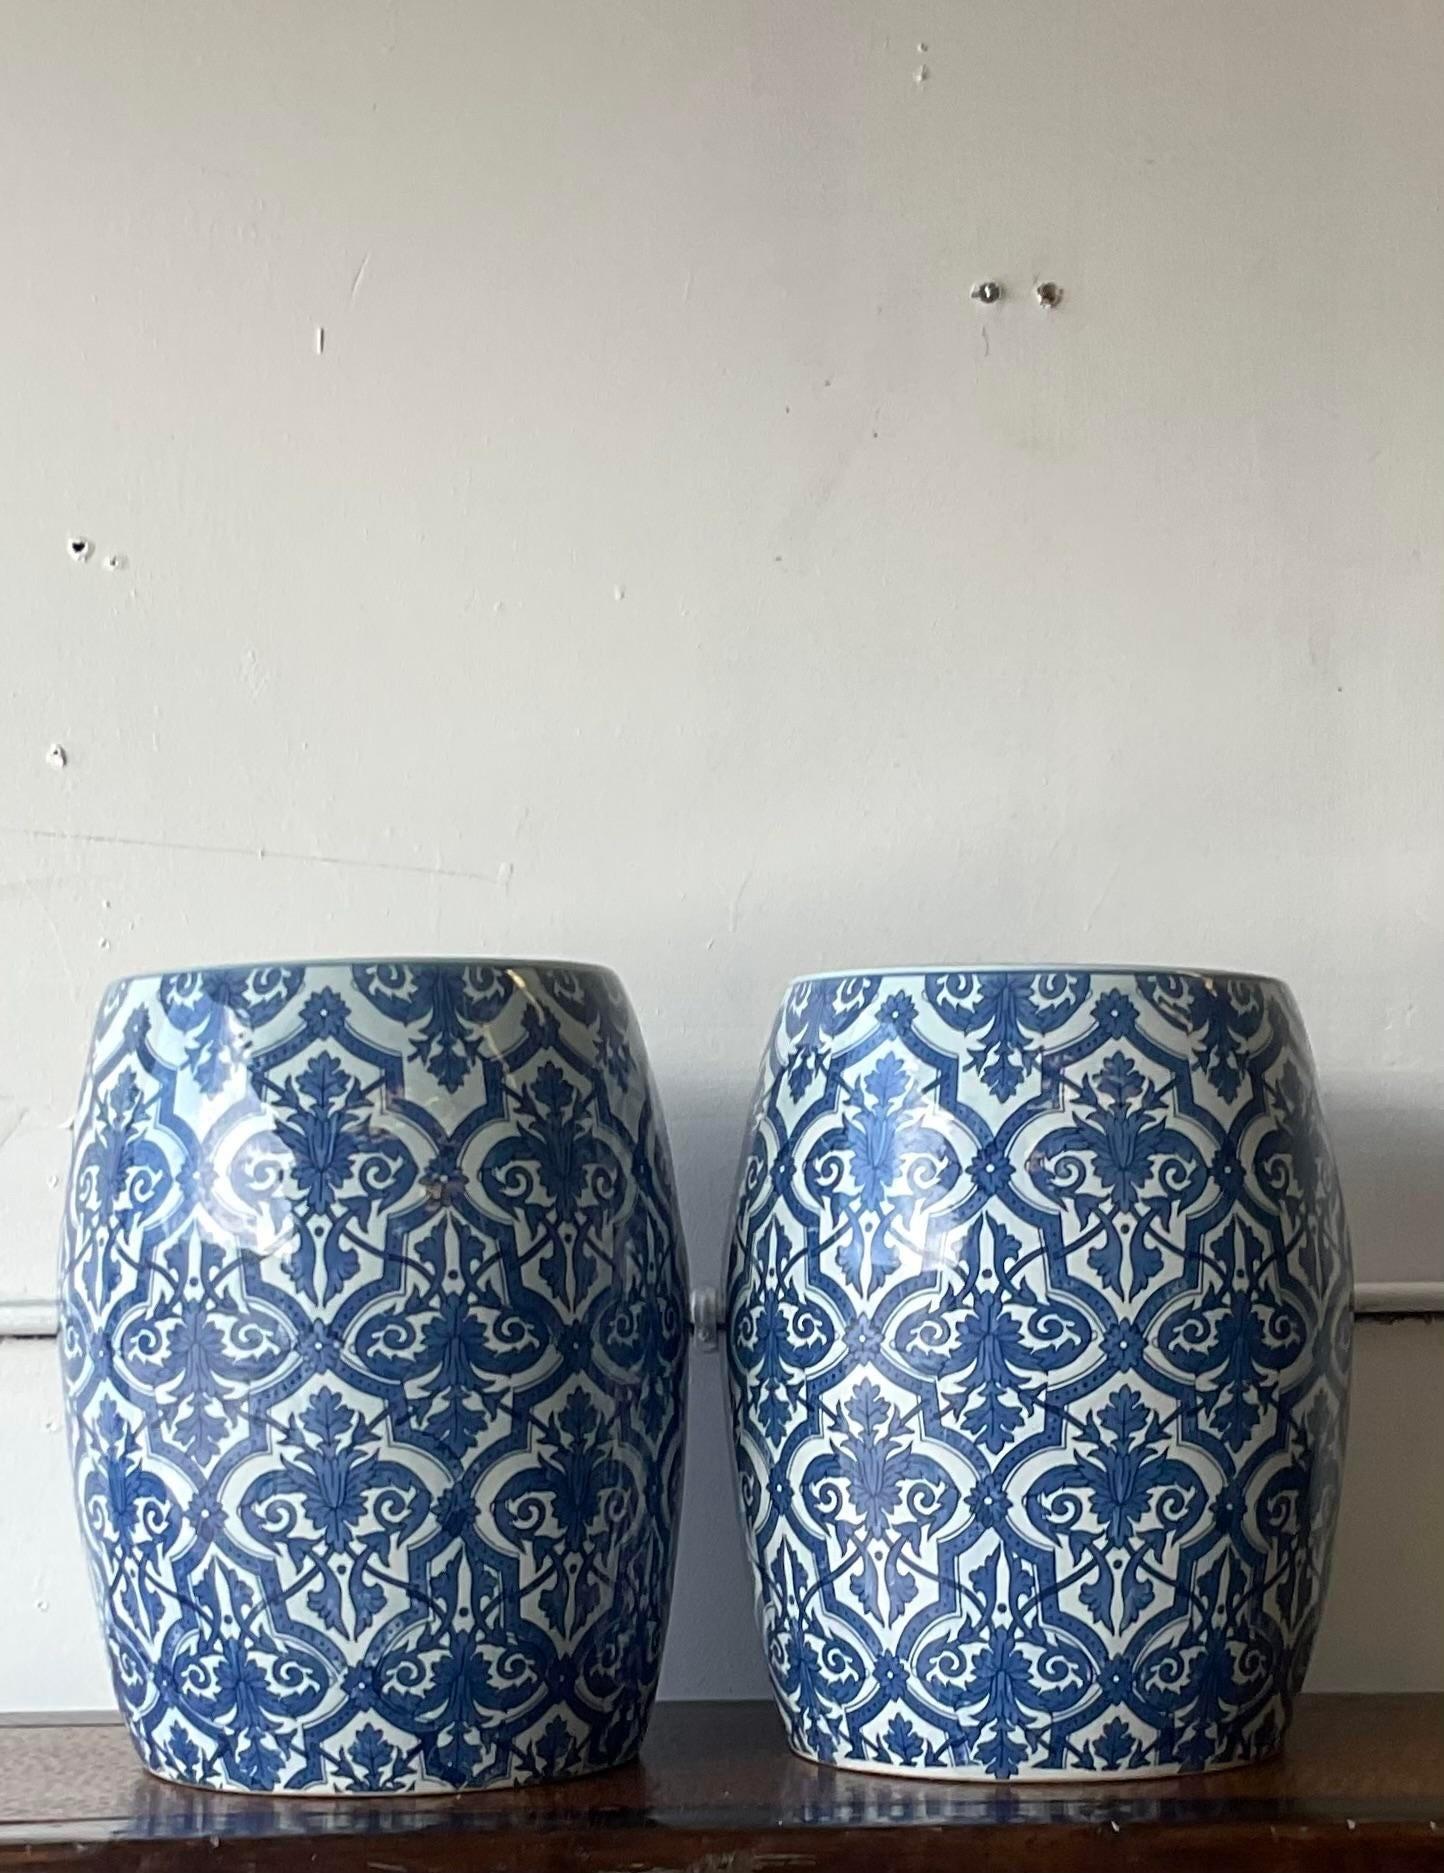 American Vintage Coastal Blue and White Garden Stools - a Pair For Sale